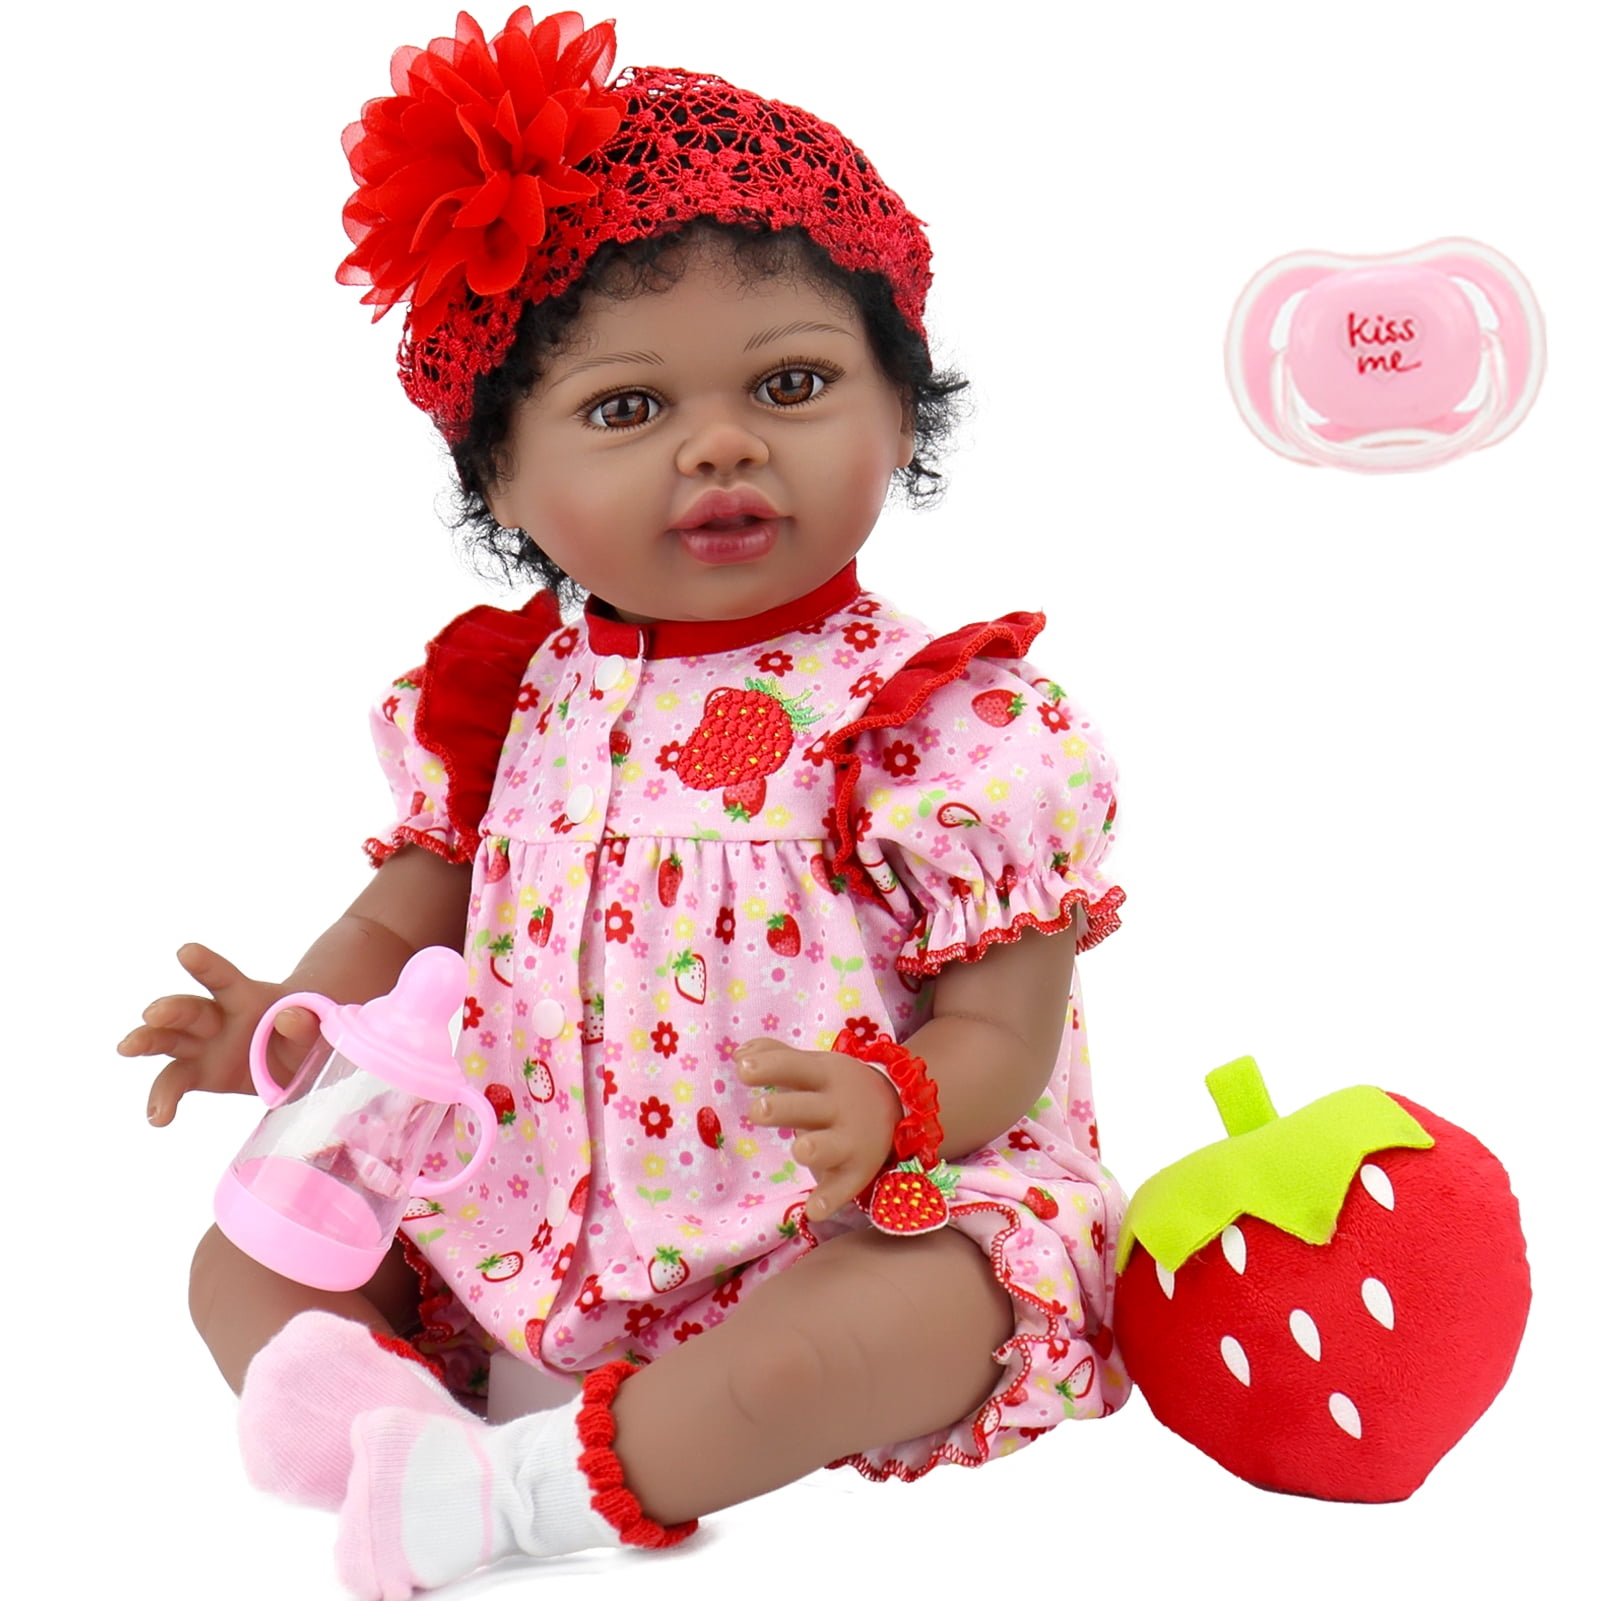 REBORN DOLL HEAVY BABY GIRL PEACH TUTU OUTFIT MAGNETIC DUMMY A 